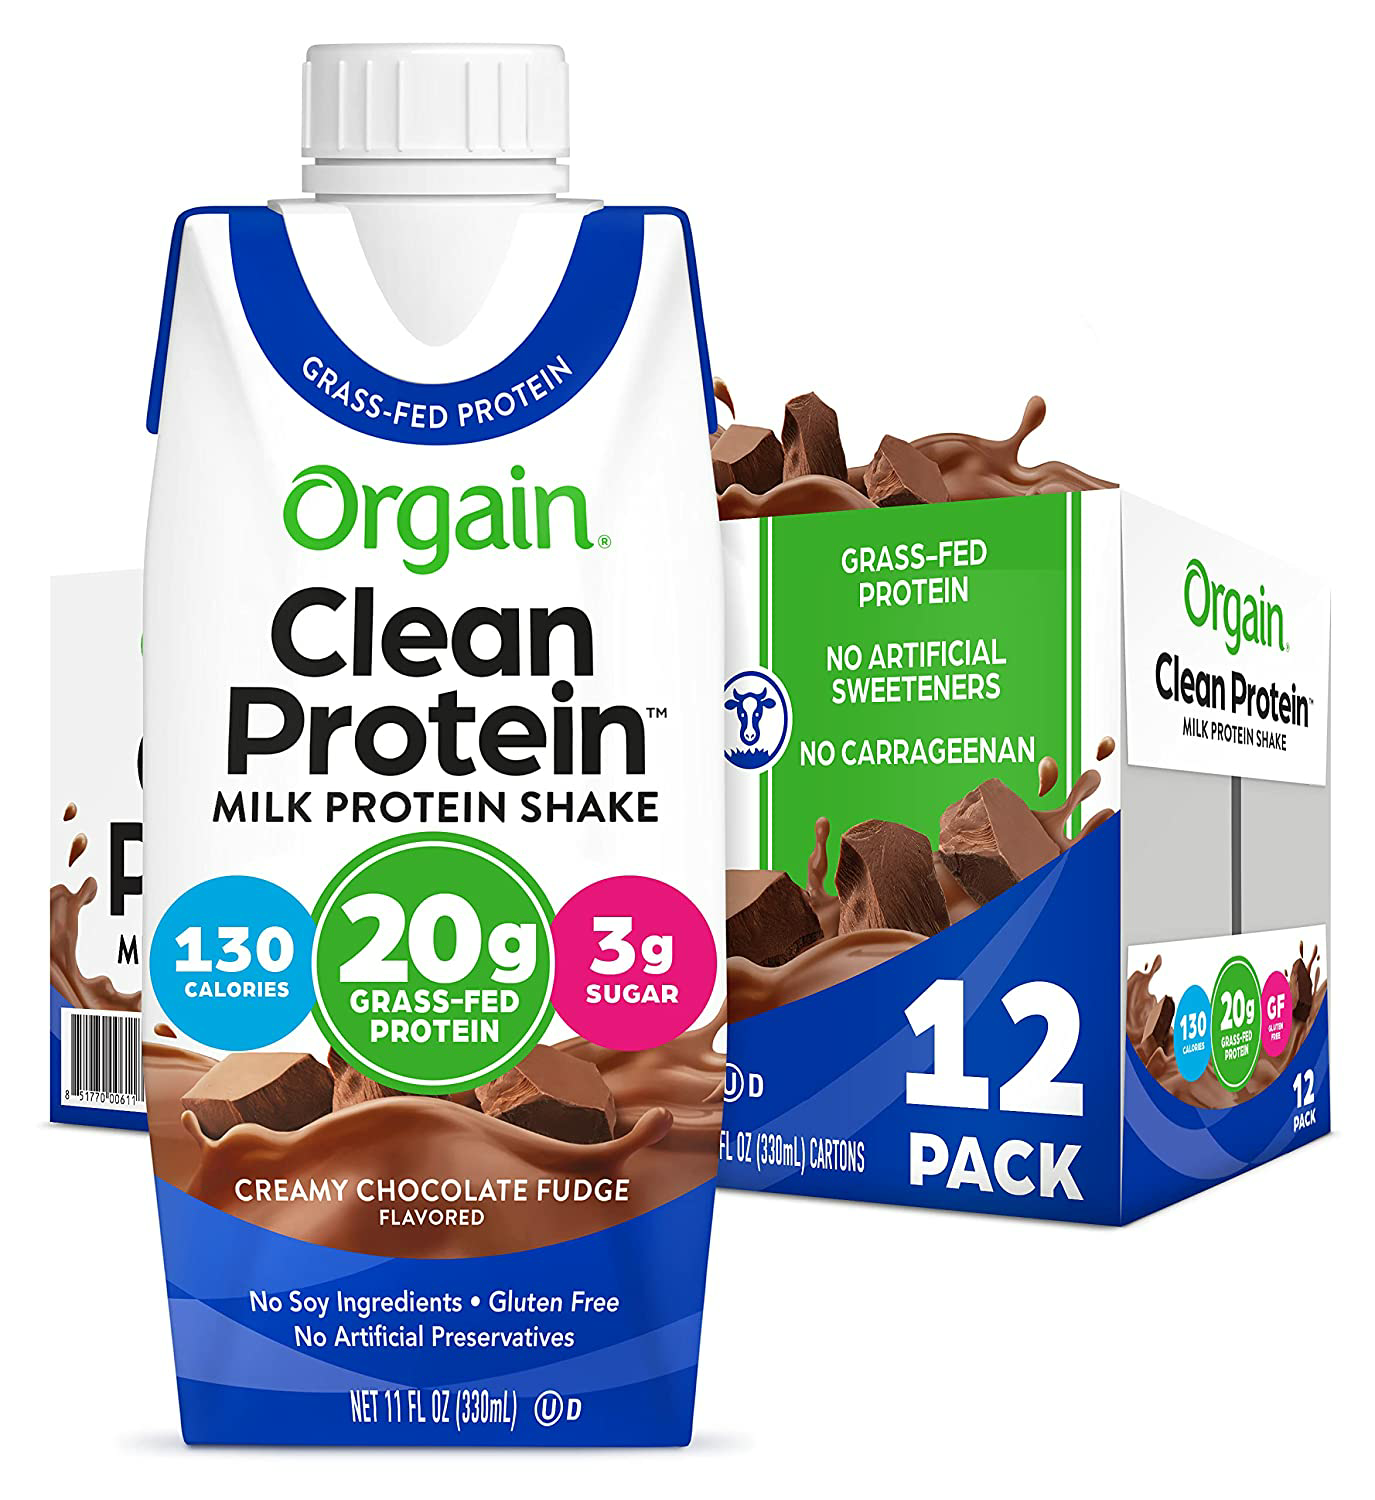 Orgain Grass Fed Clean Protein Shake, Creamy Chocolate Fudge - 20g of Protein, Meal Replacement, Ready to Drink, Gluten Free, Soy Free, Kosher, Packaging May Vary, 11 $20.63